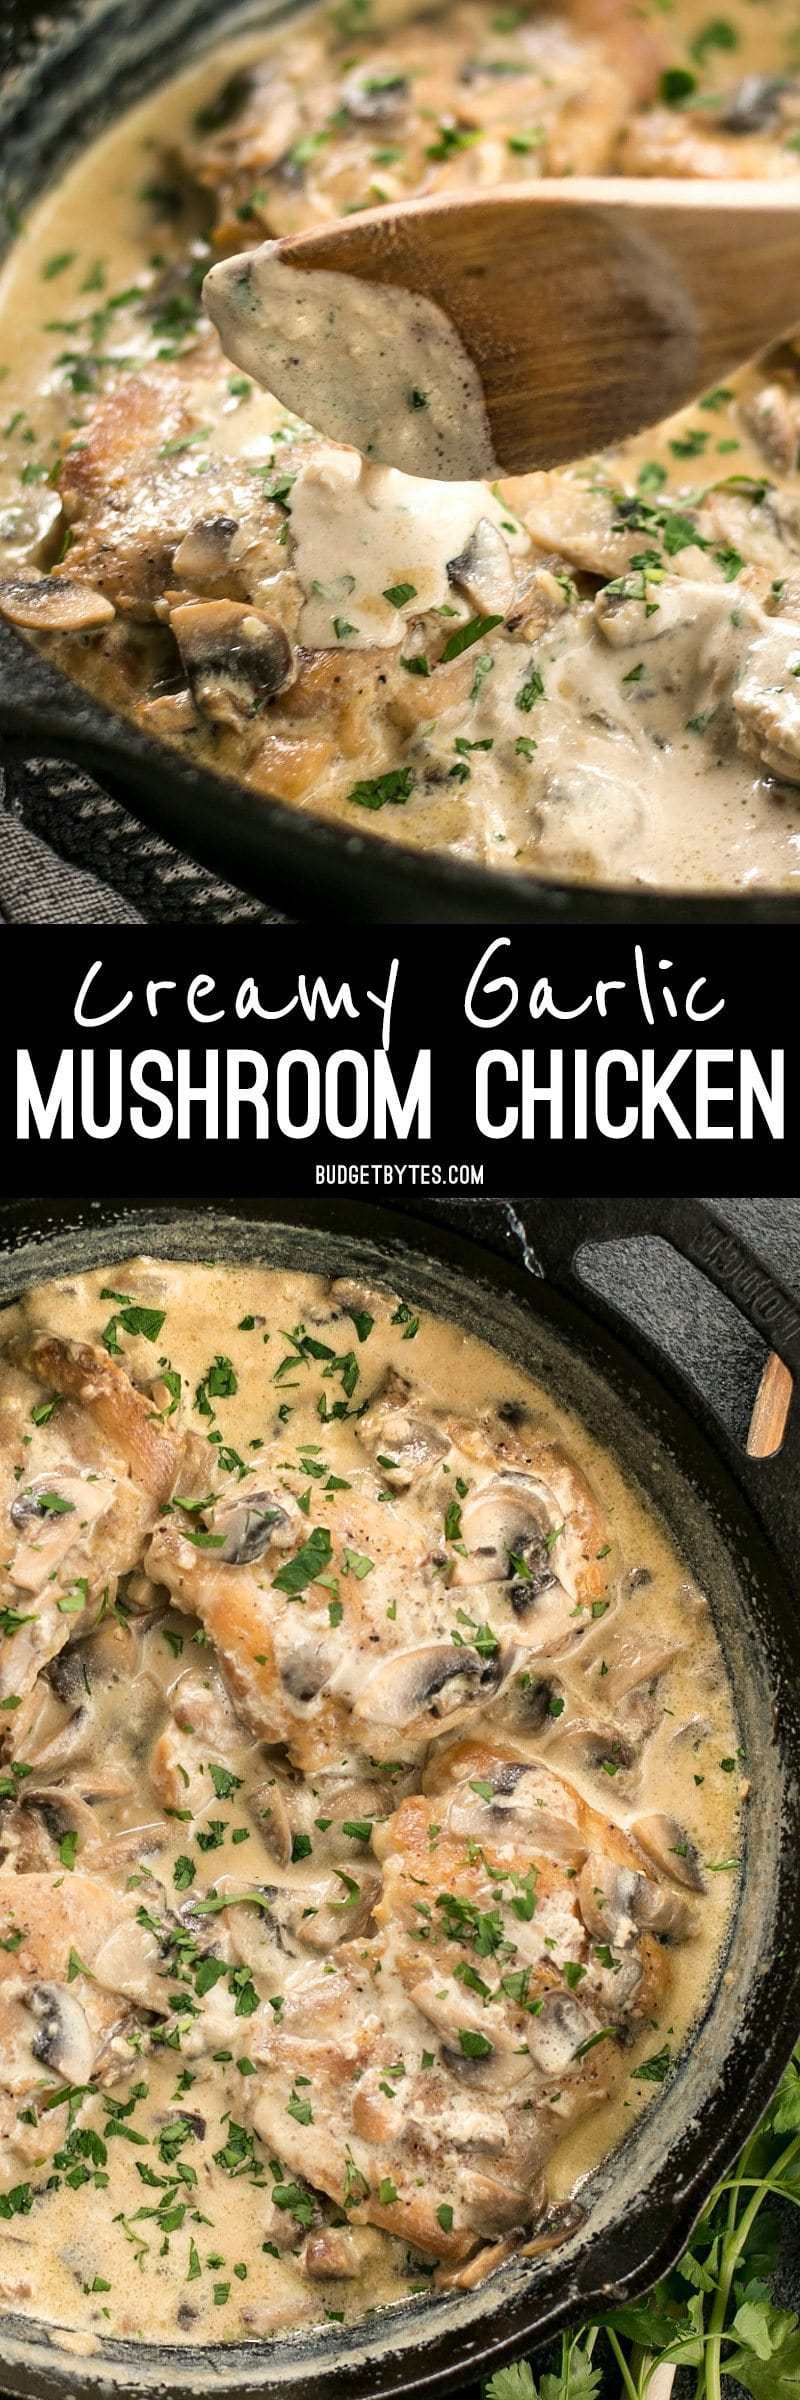 Simple pan sauces save the day in this quick and easy Creamy Garlic Mushroom Chicken! BudgetBytes.com